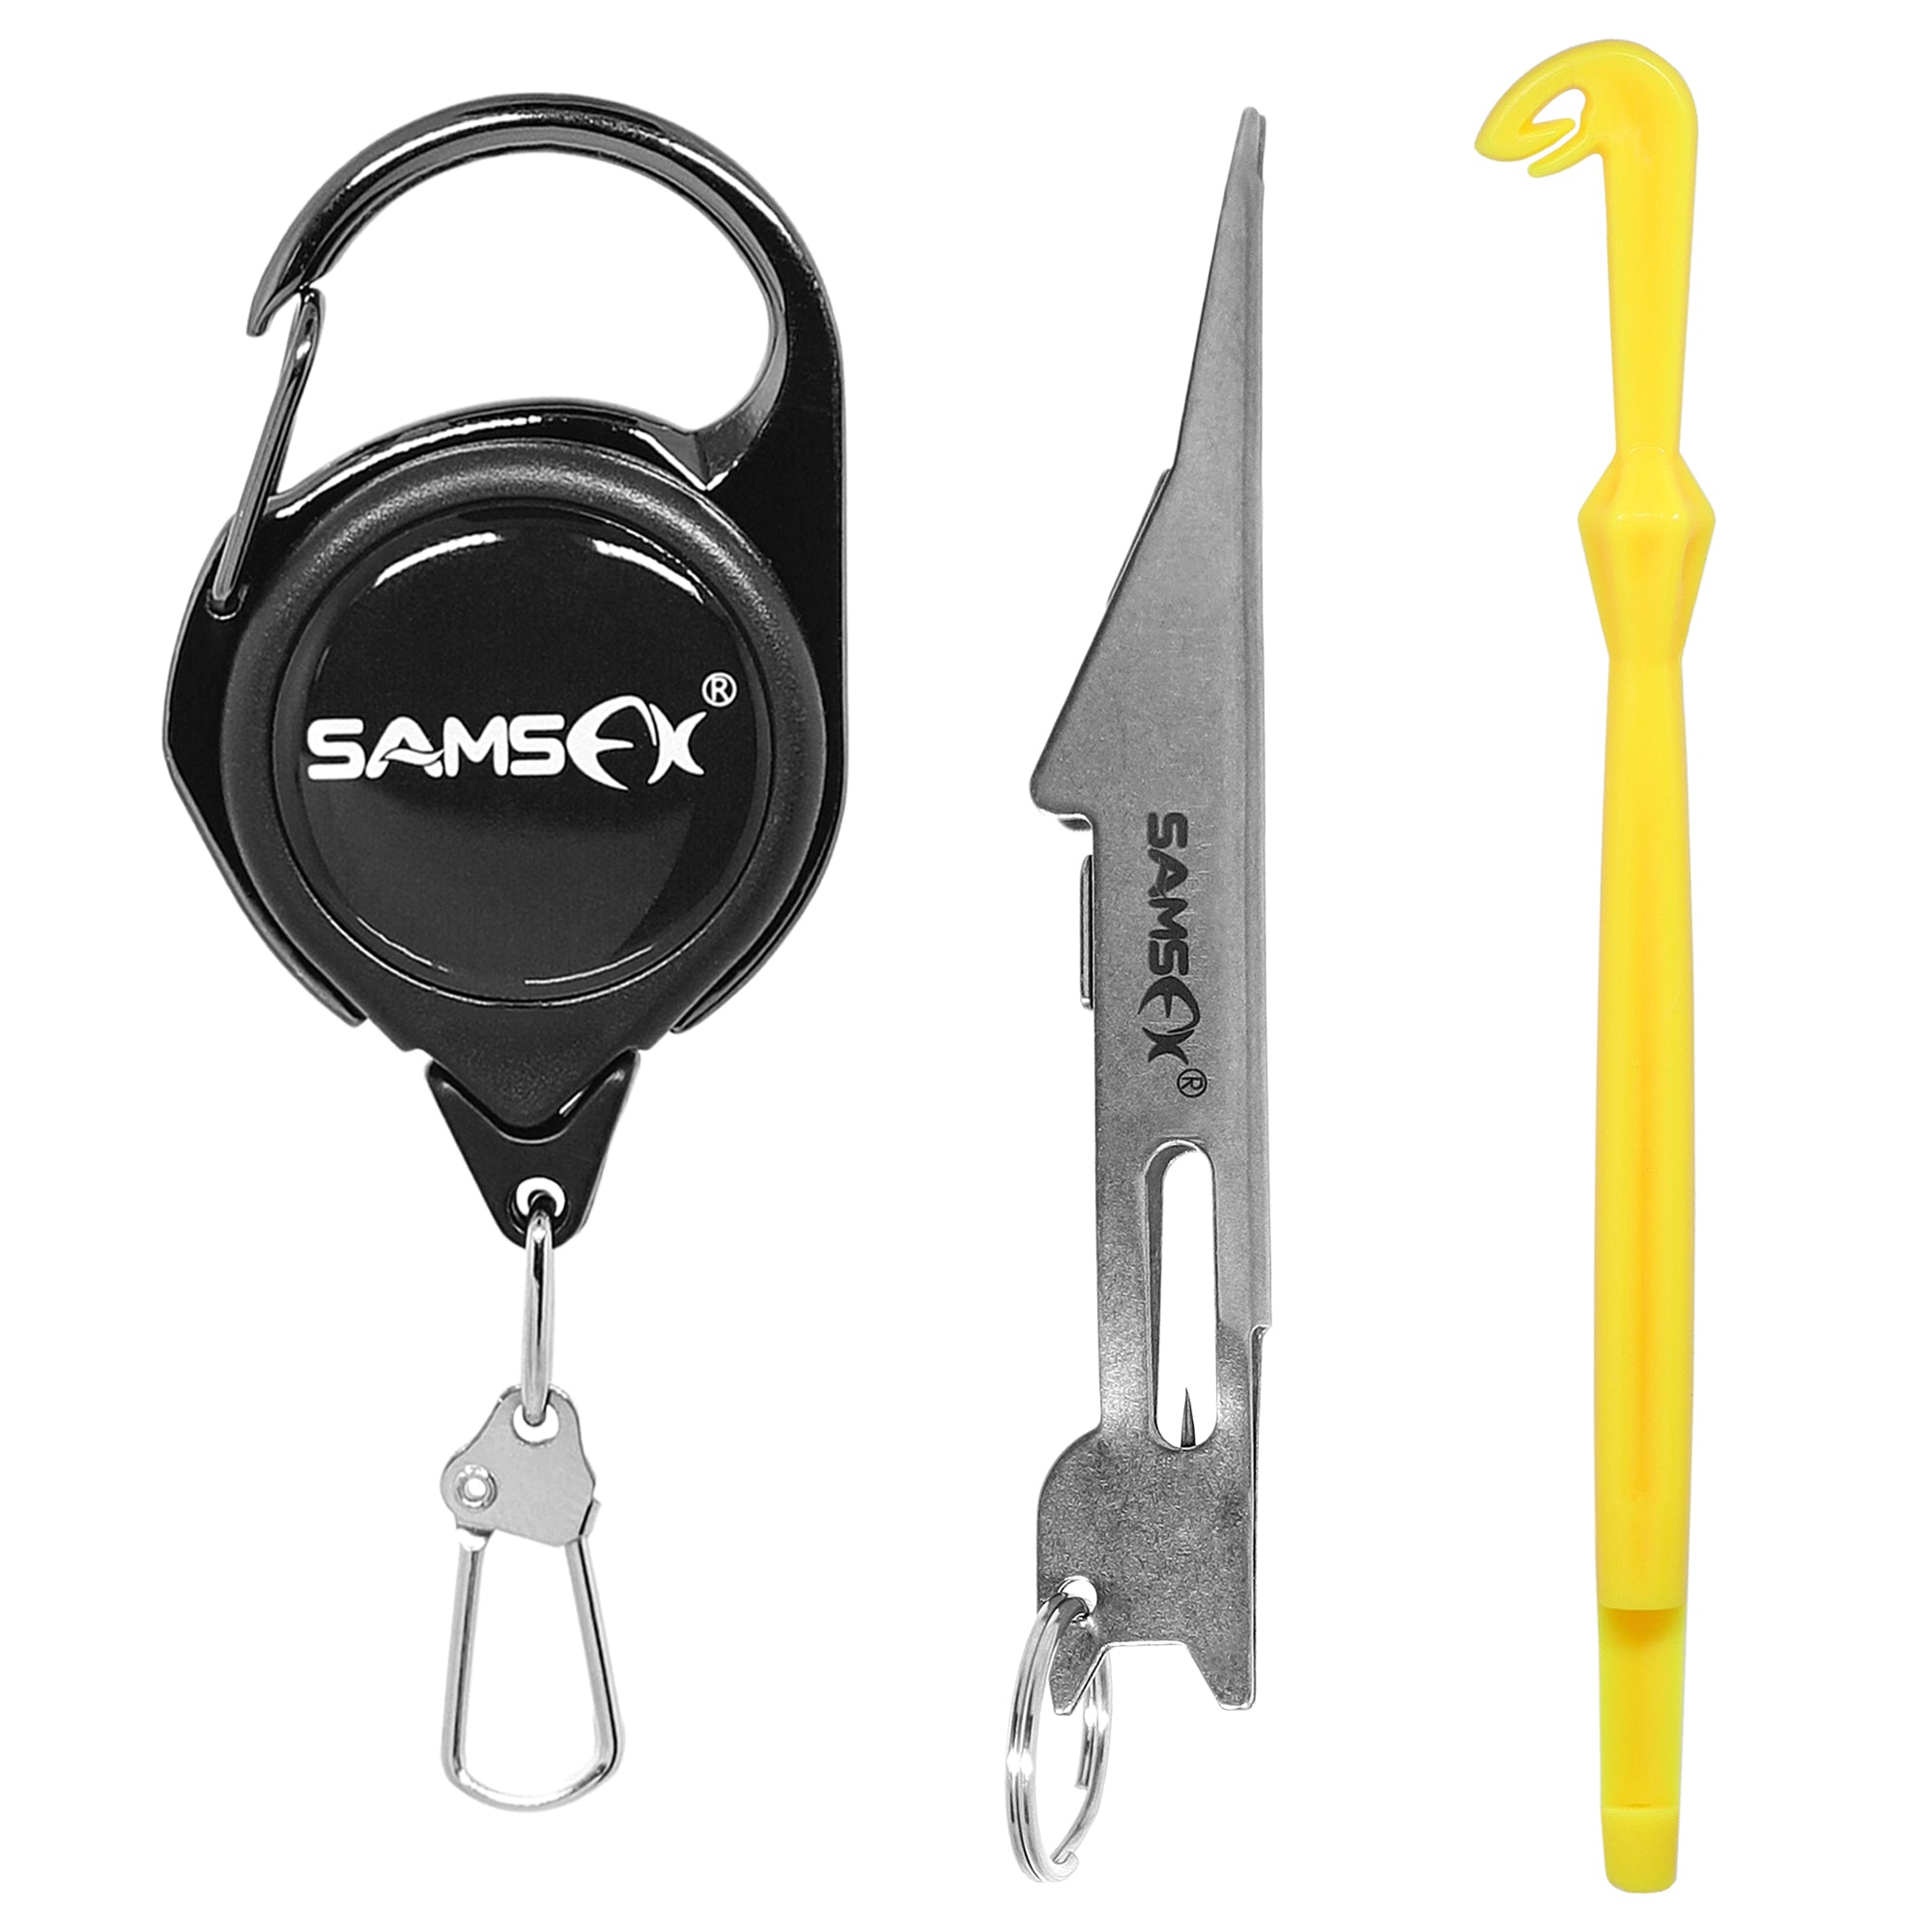  SAMSFX Fishing Fly Fishing Knot Tying Tools Line Clipper with  Retractor (Silver and Black) : Sports & Outdoors